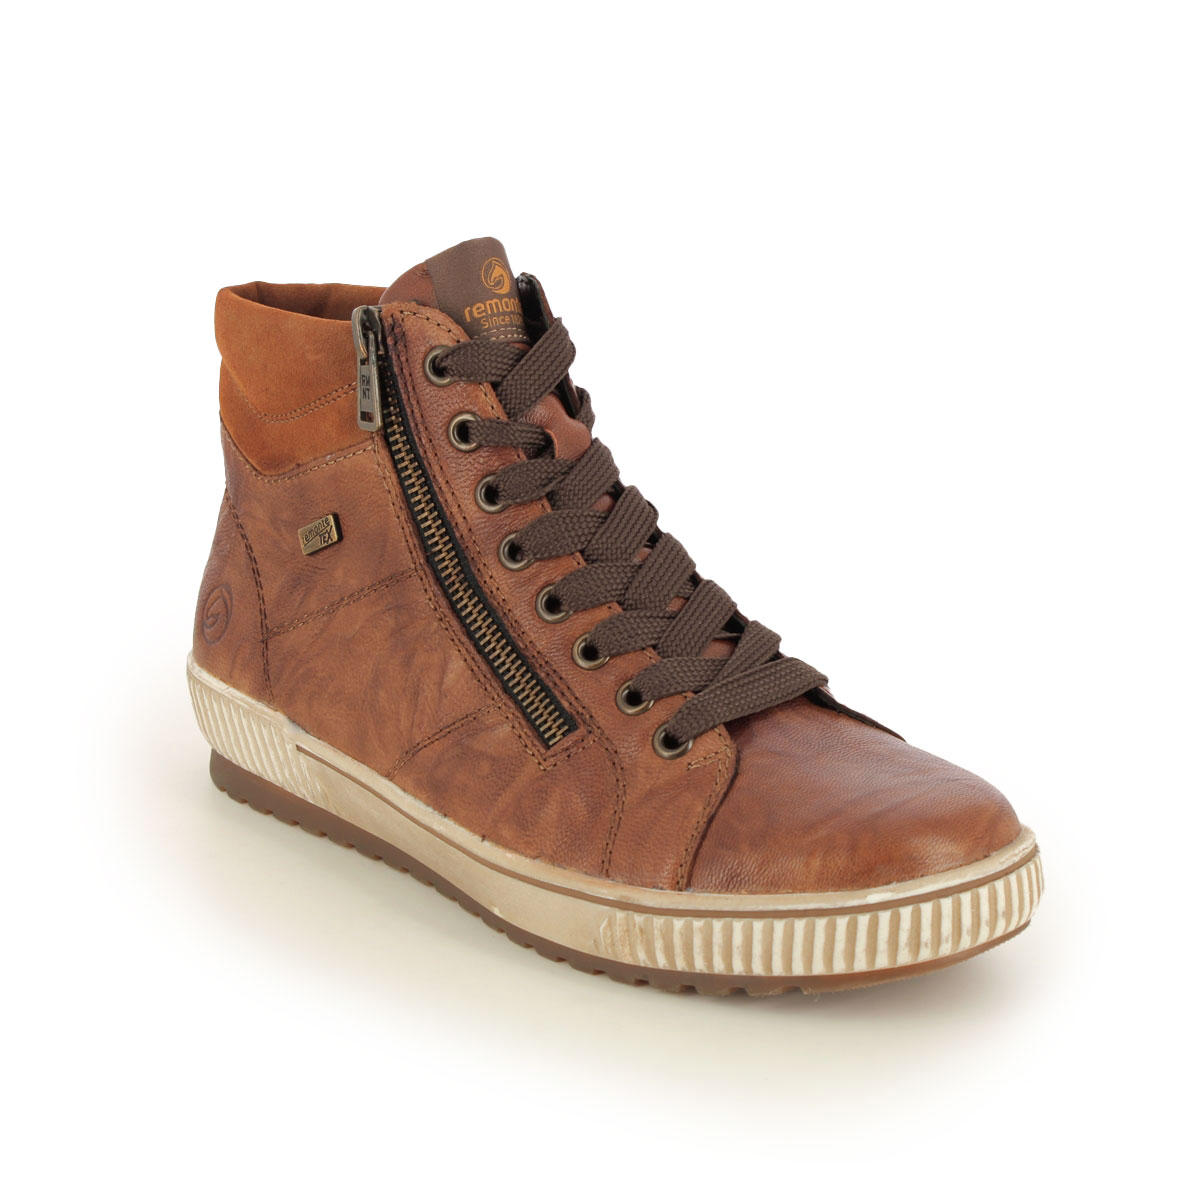 Remonte Tanaloto Tex Tan Leather  Womens Hi Tops D0772-22 In Size 36 In Plain Tan Leather